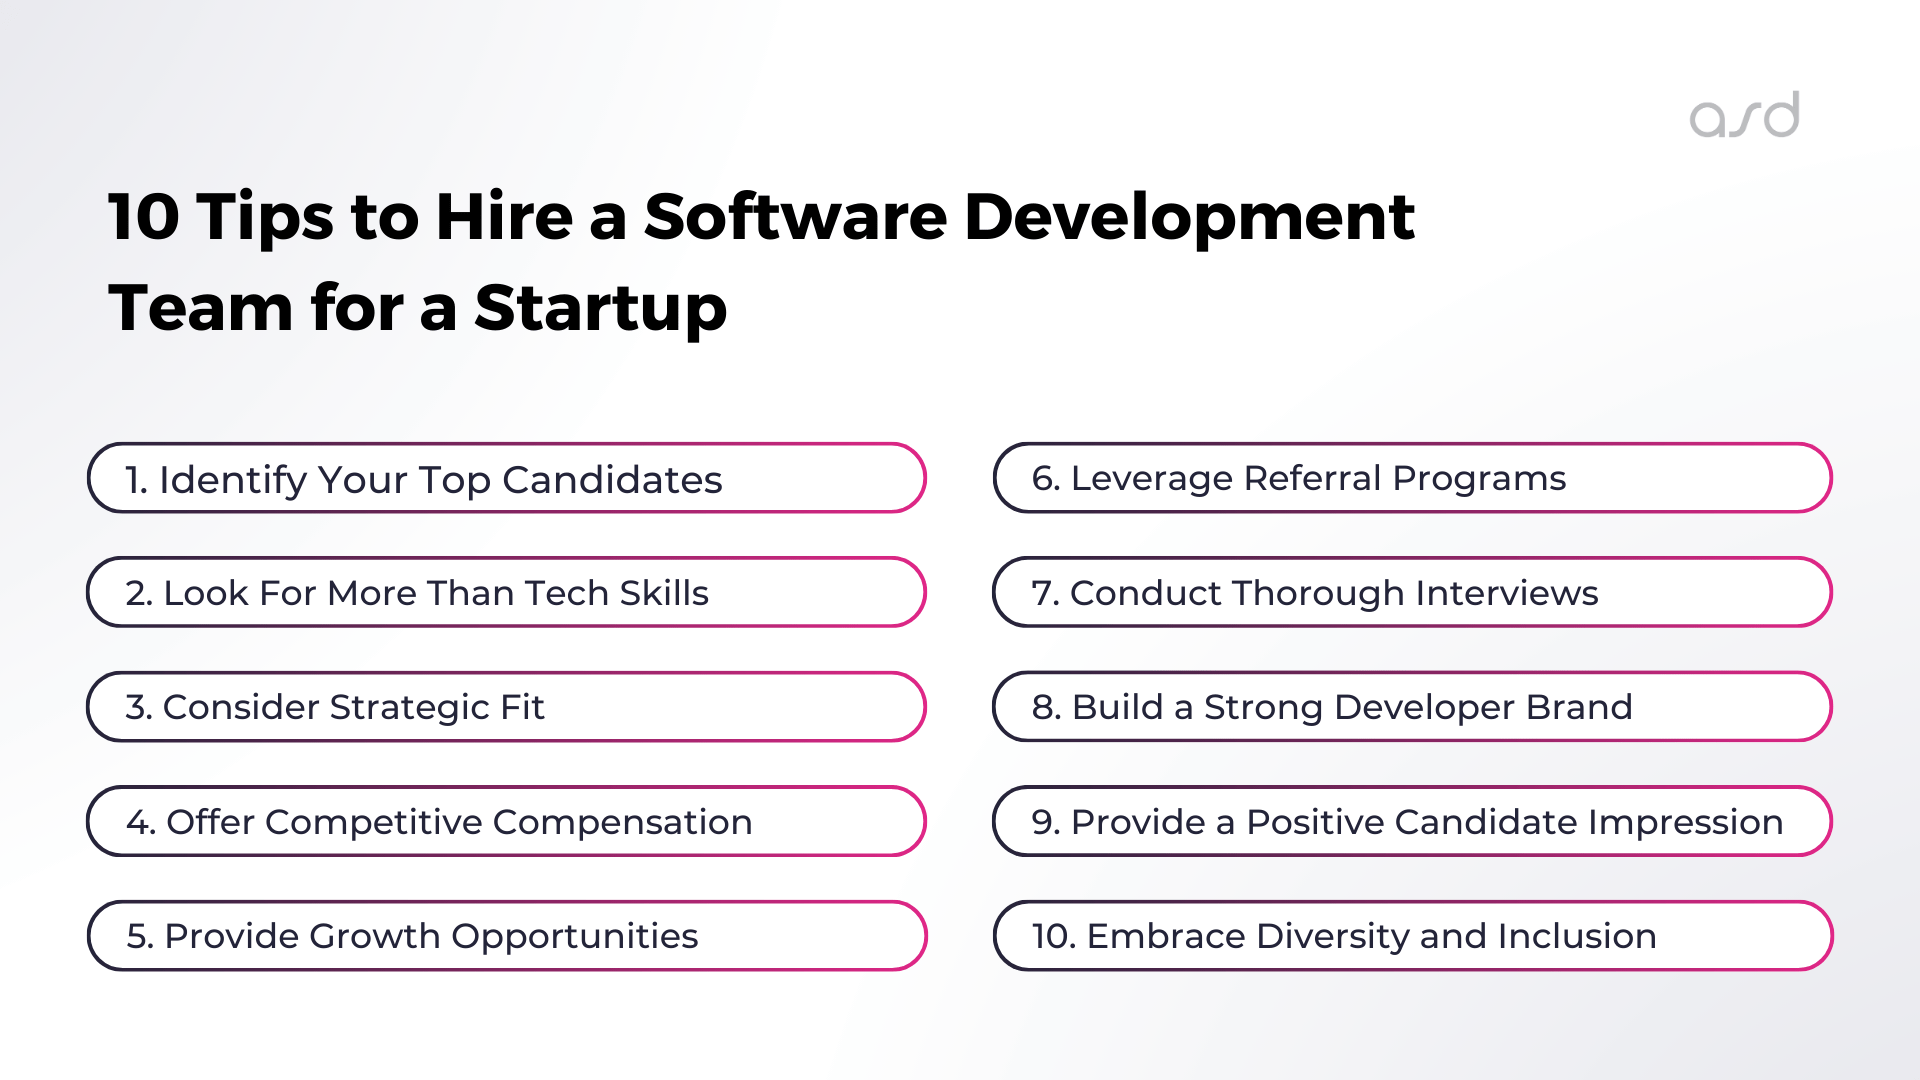 Tips for Hiring Software Developers at a Startup (image2)